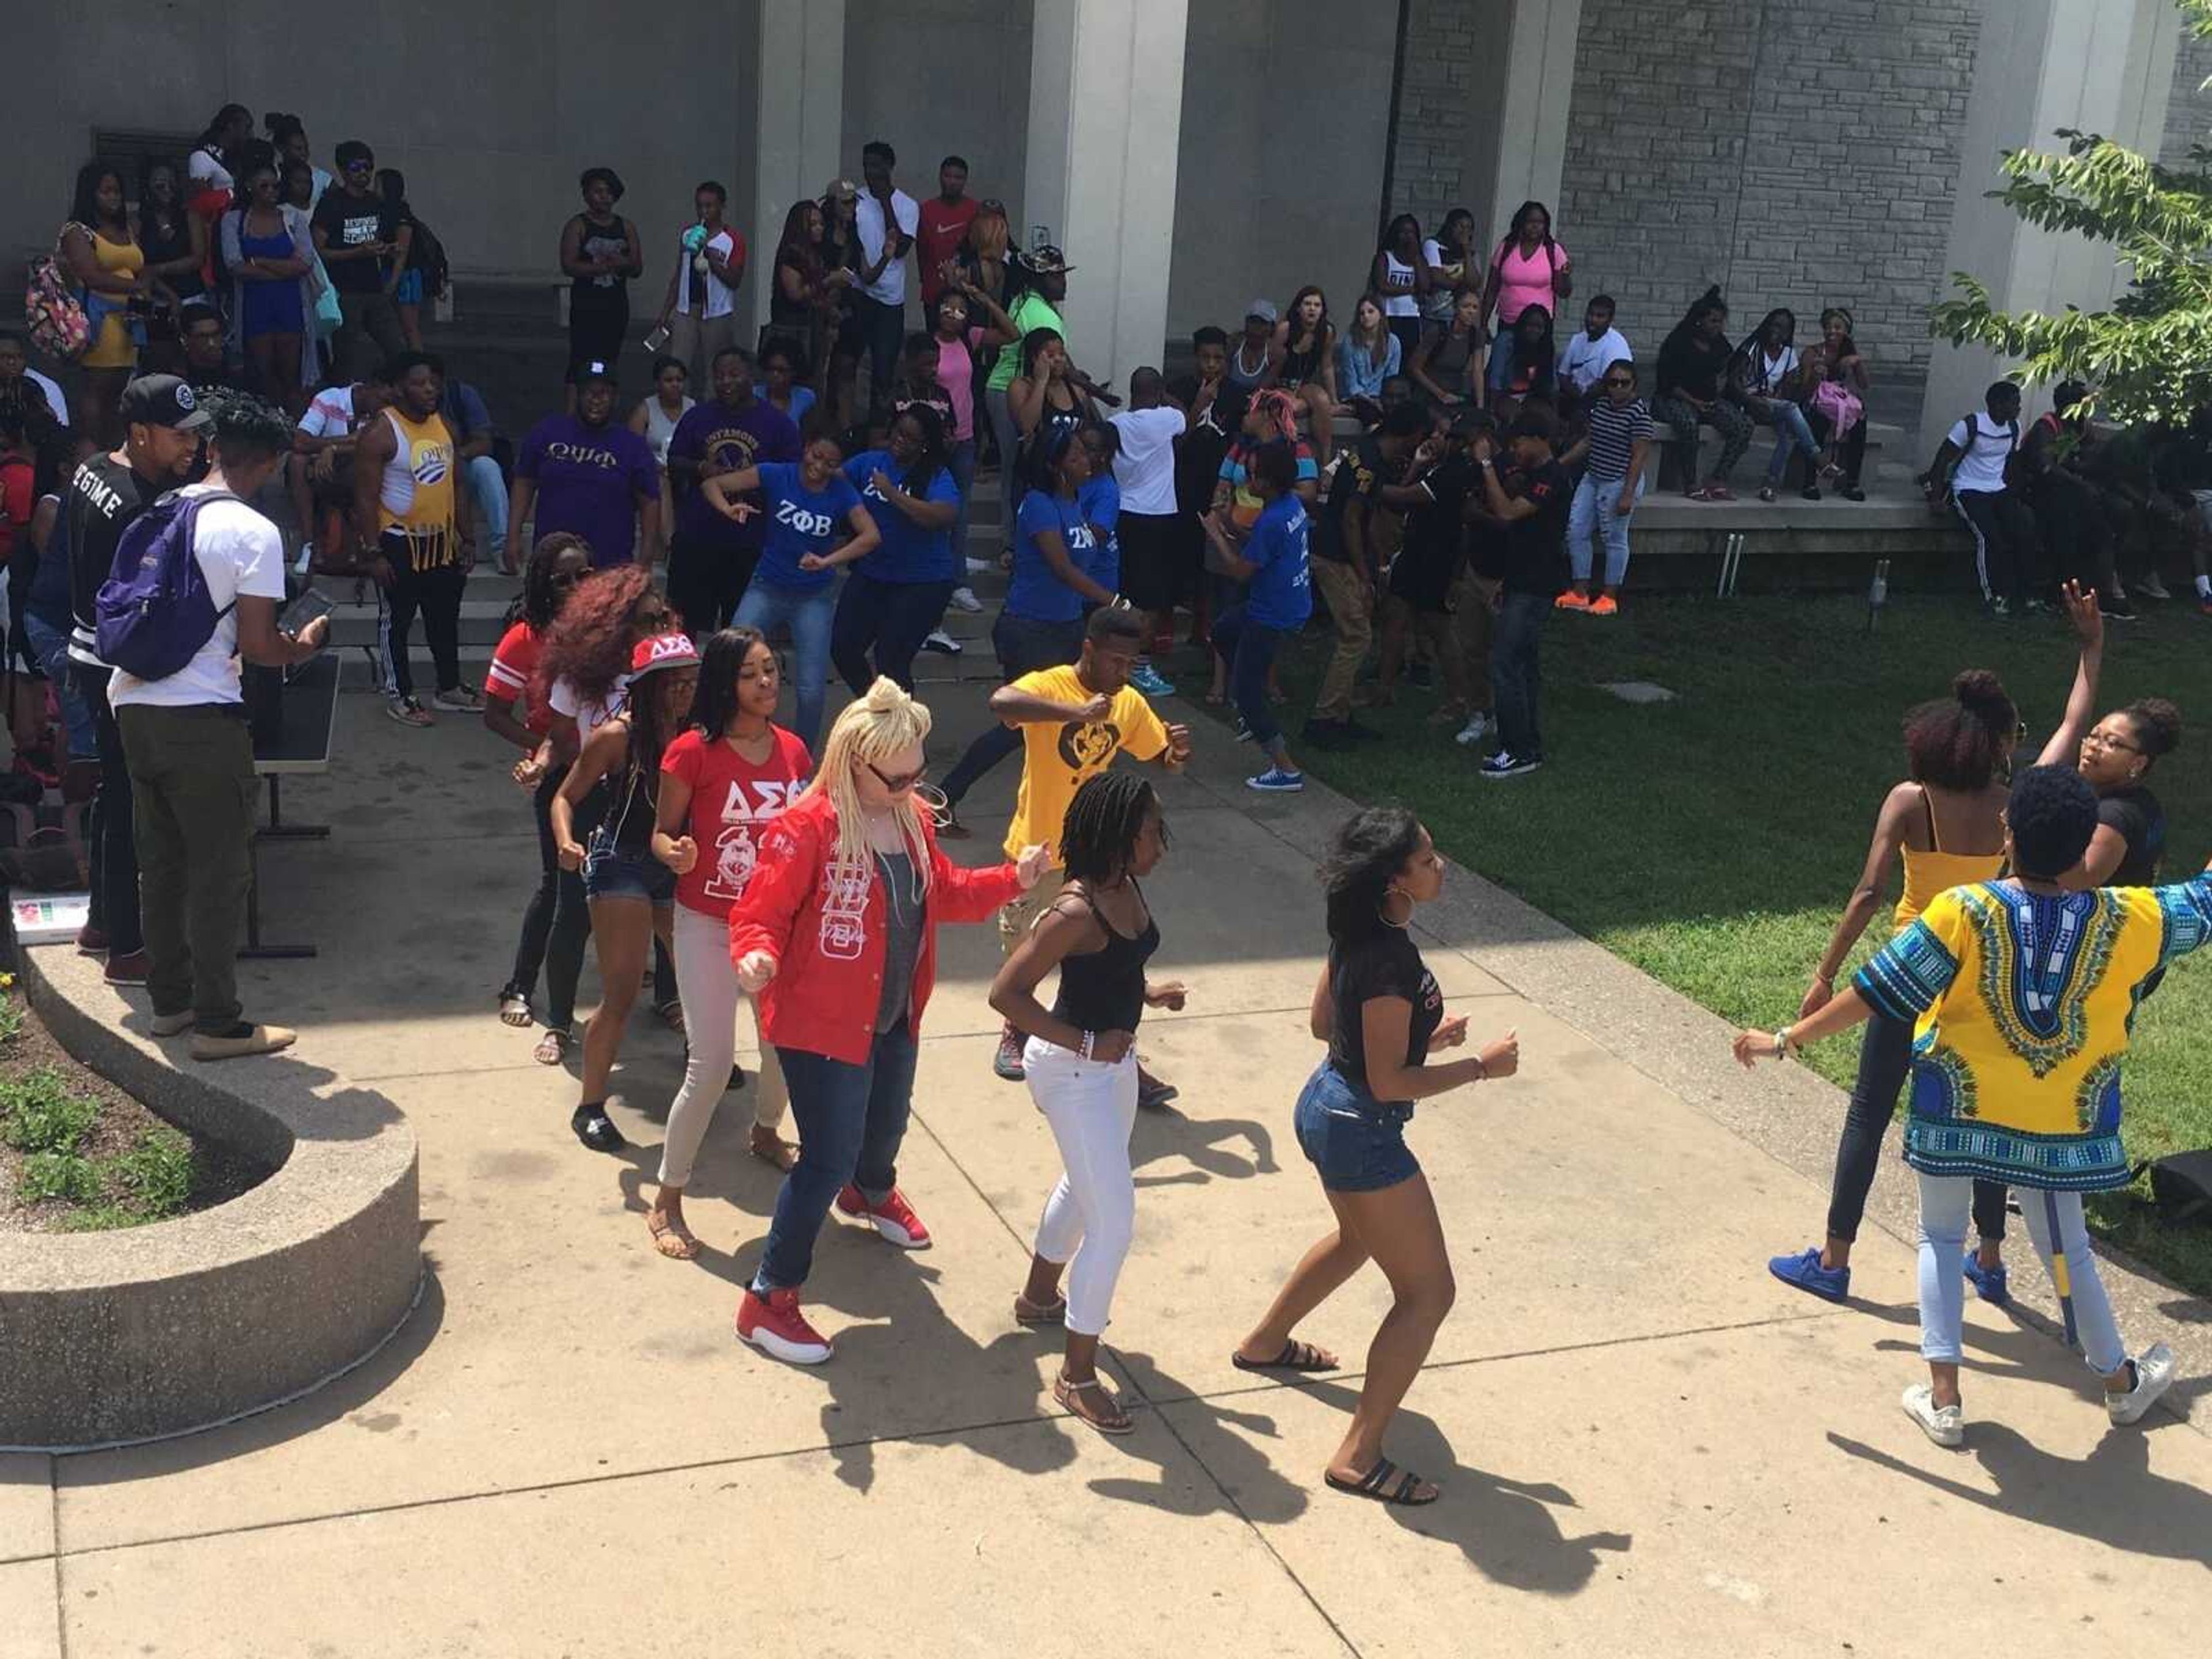 On Aug. 24, Jada Wan lead a stroll with members of her organization Sigma Gamma Rho Sorority Inc. Bethany Ferguson, Nyara Williams and Di'Shae Johnson during common hour in front of Kent Library.